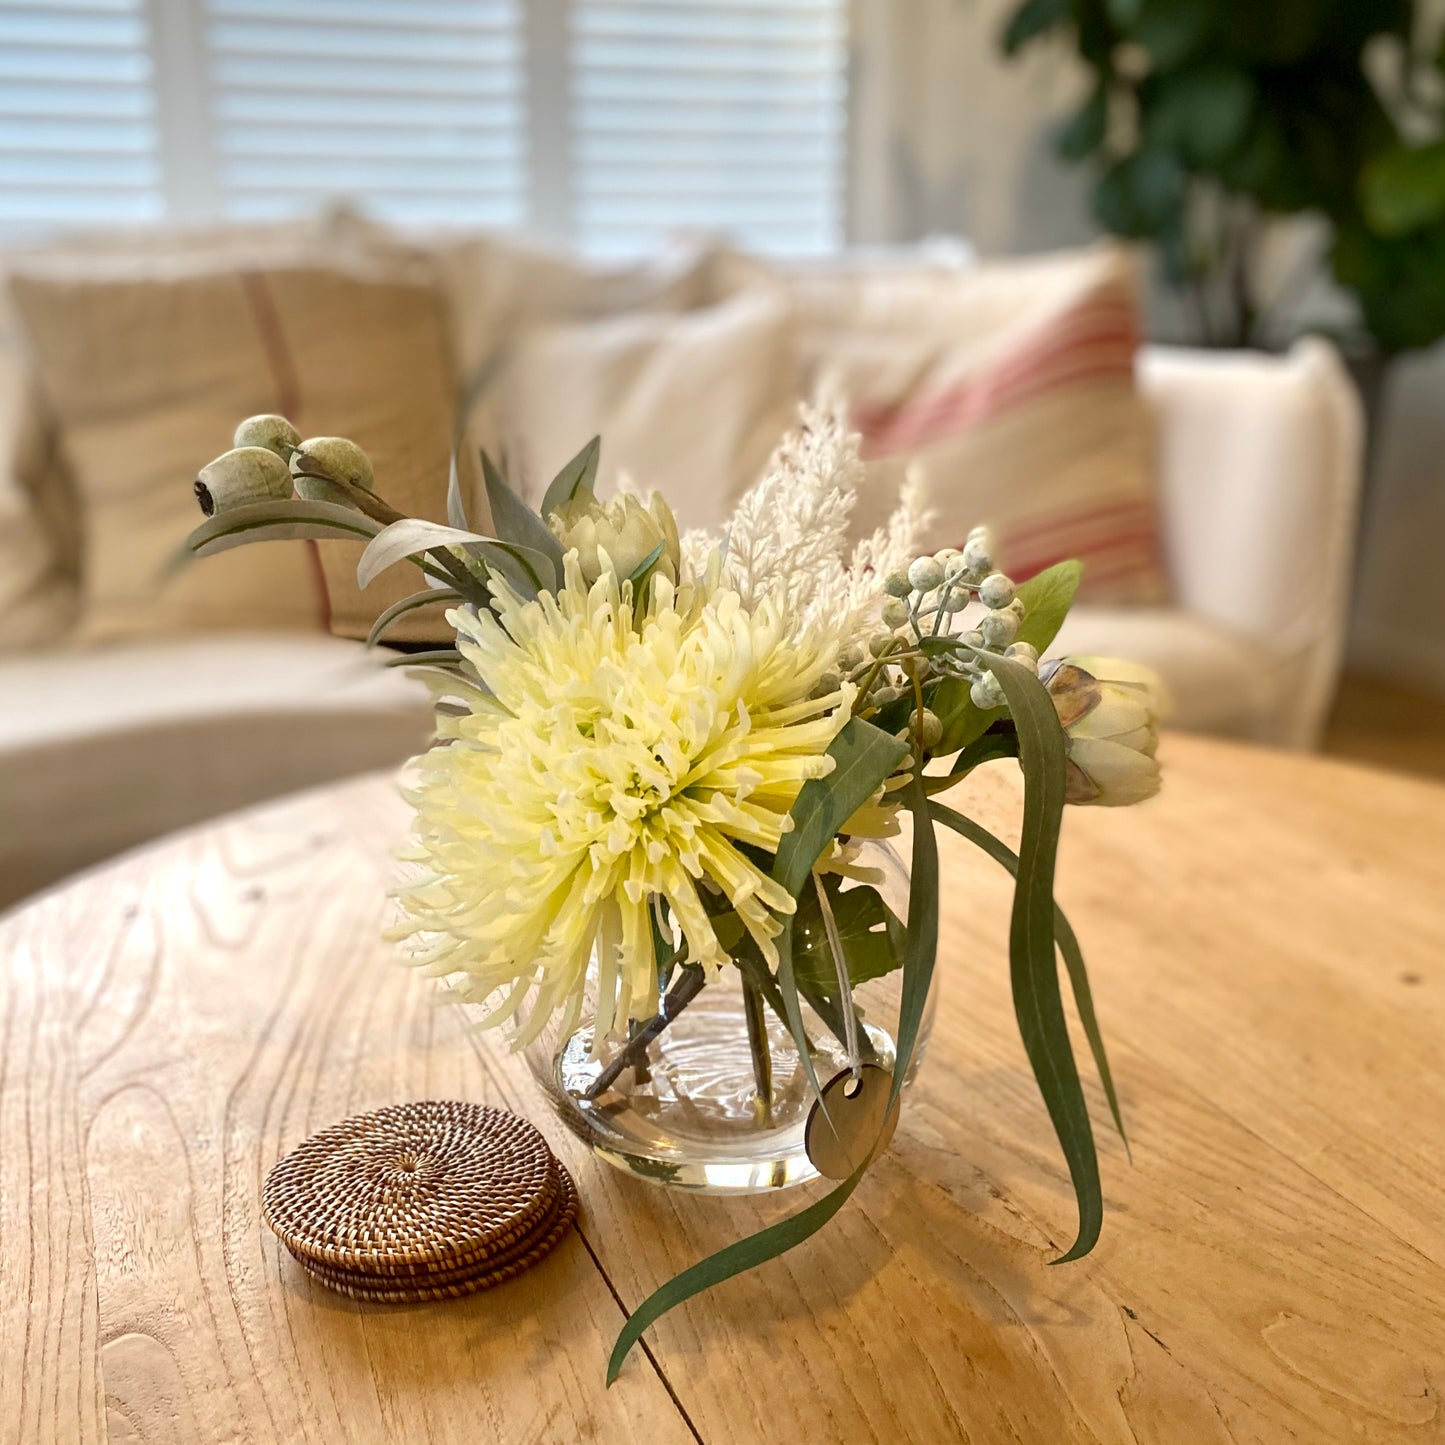 The Little Neutral Natives: Charming Native Arrangements for Your Space